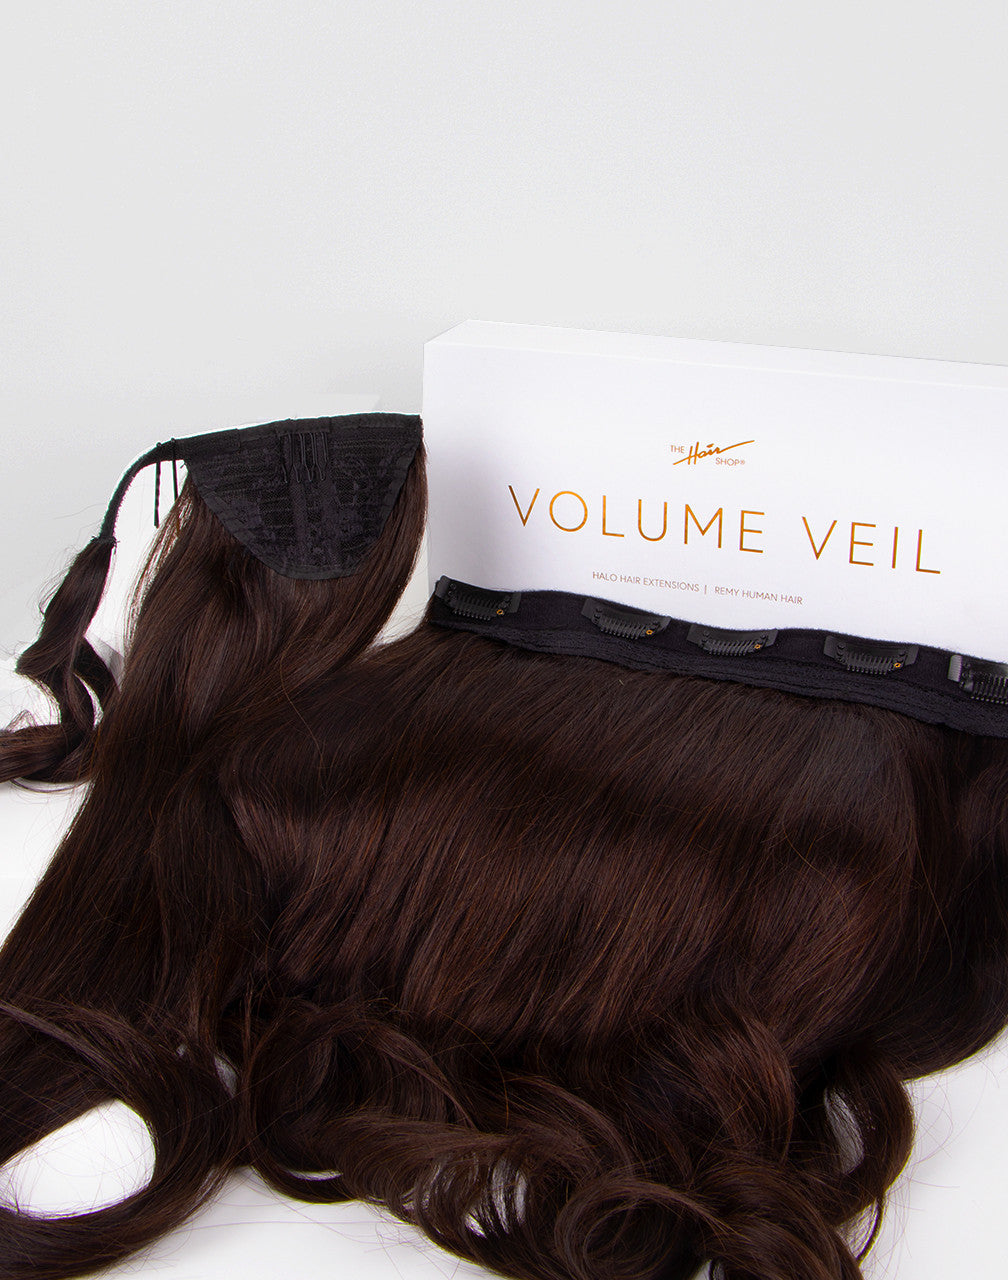 Volume Veil & Wrap Ponytail as the Wrap & Snap duo with packaging